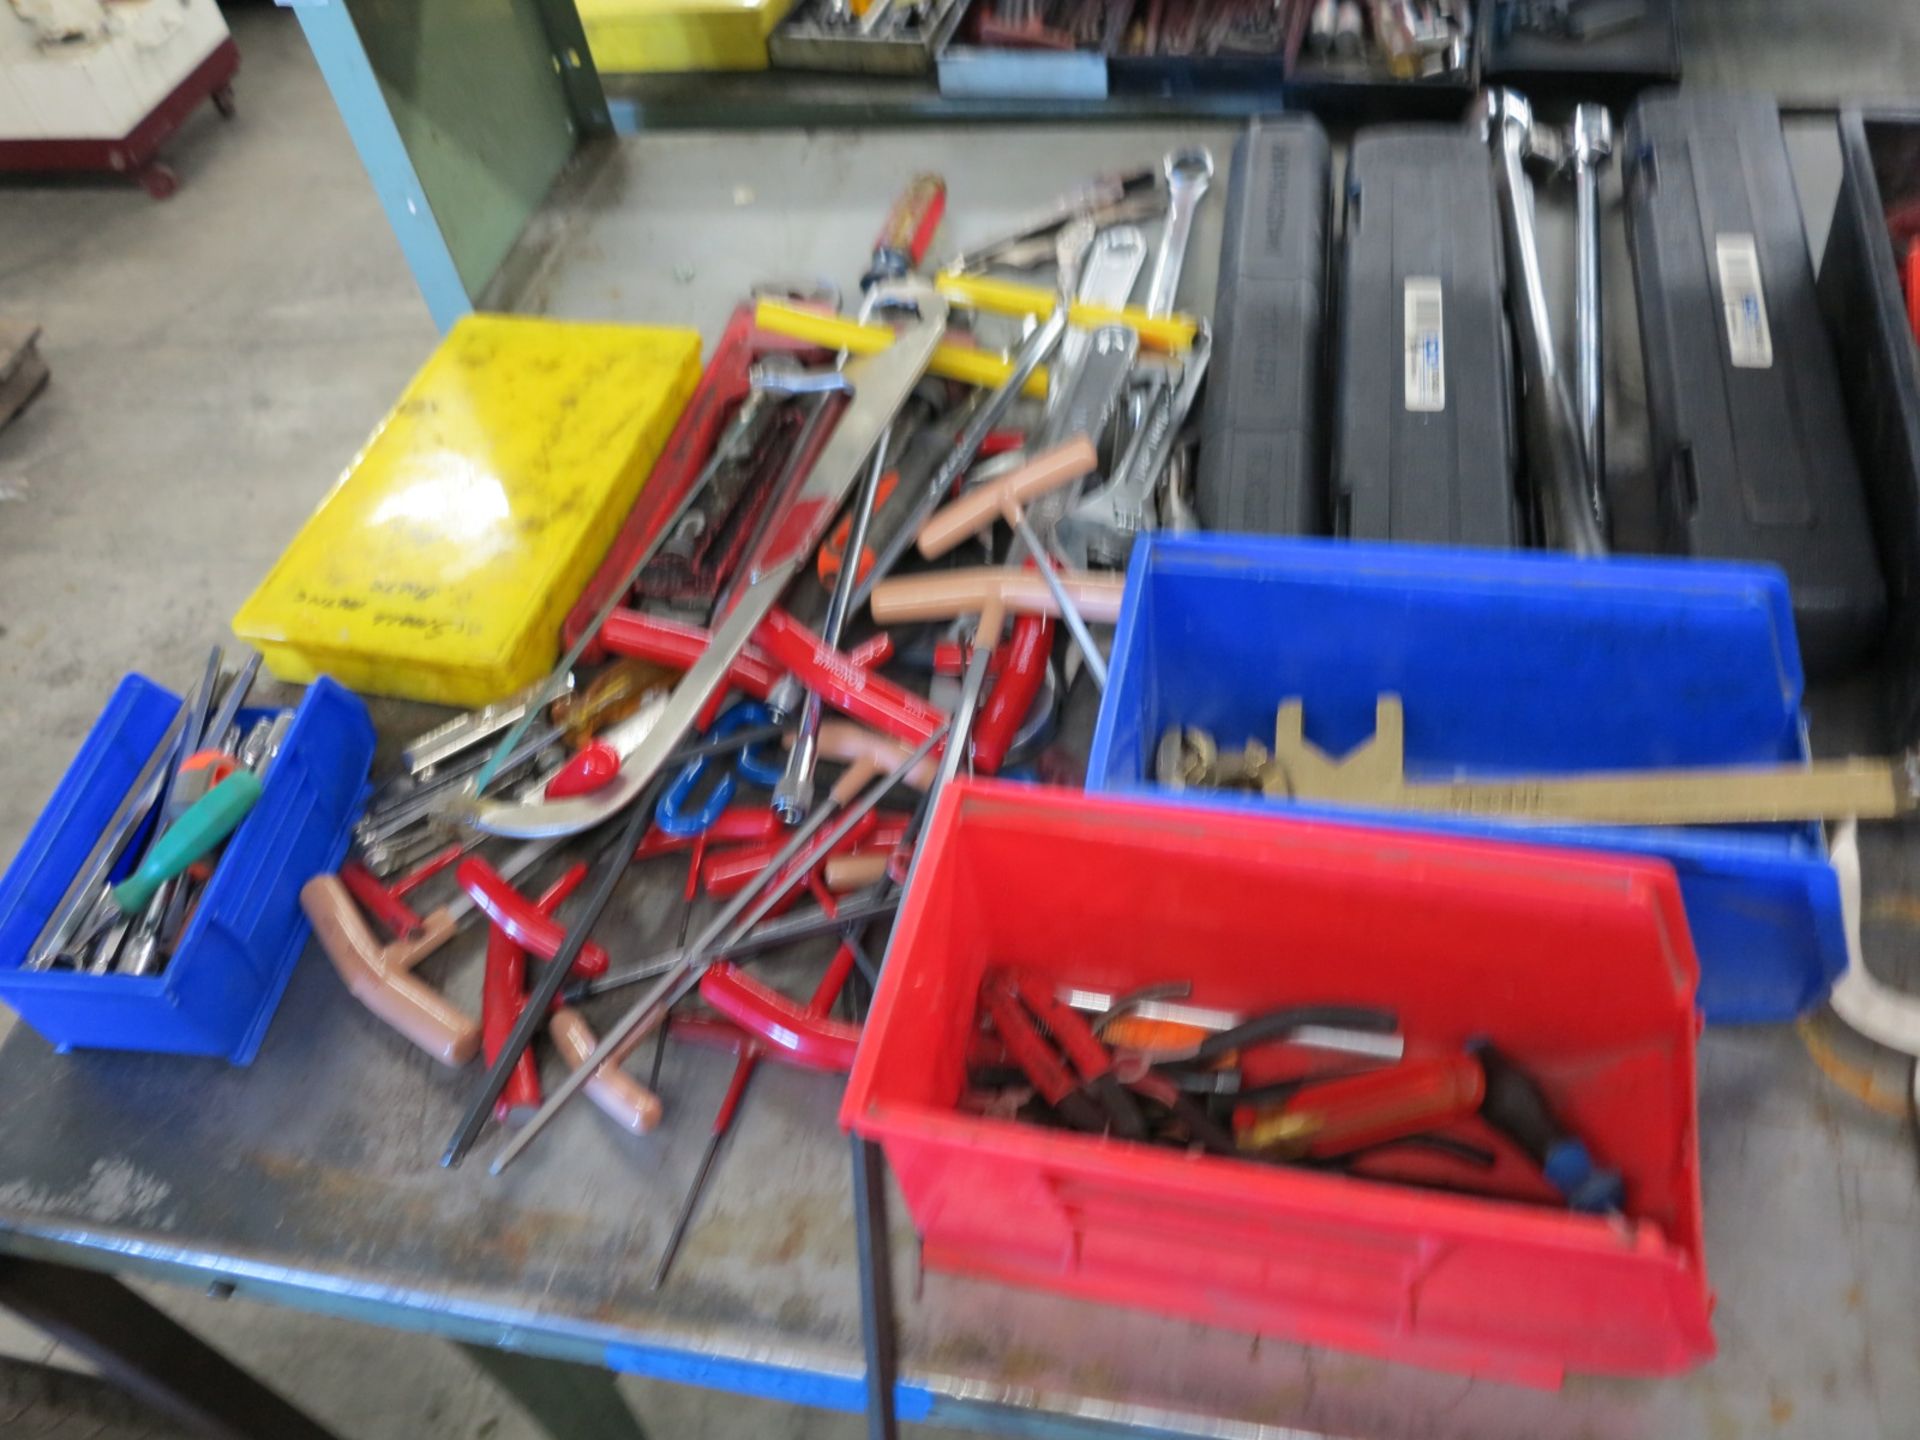 5' STEEL WORKBENCH WITH LARGE ASSORTMENT OF HAND TOOLS INCLUDING APPROX 5 TORQUE WRENCHES, ETC. - Image 5 of 5